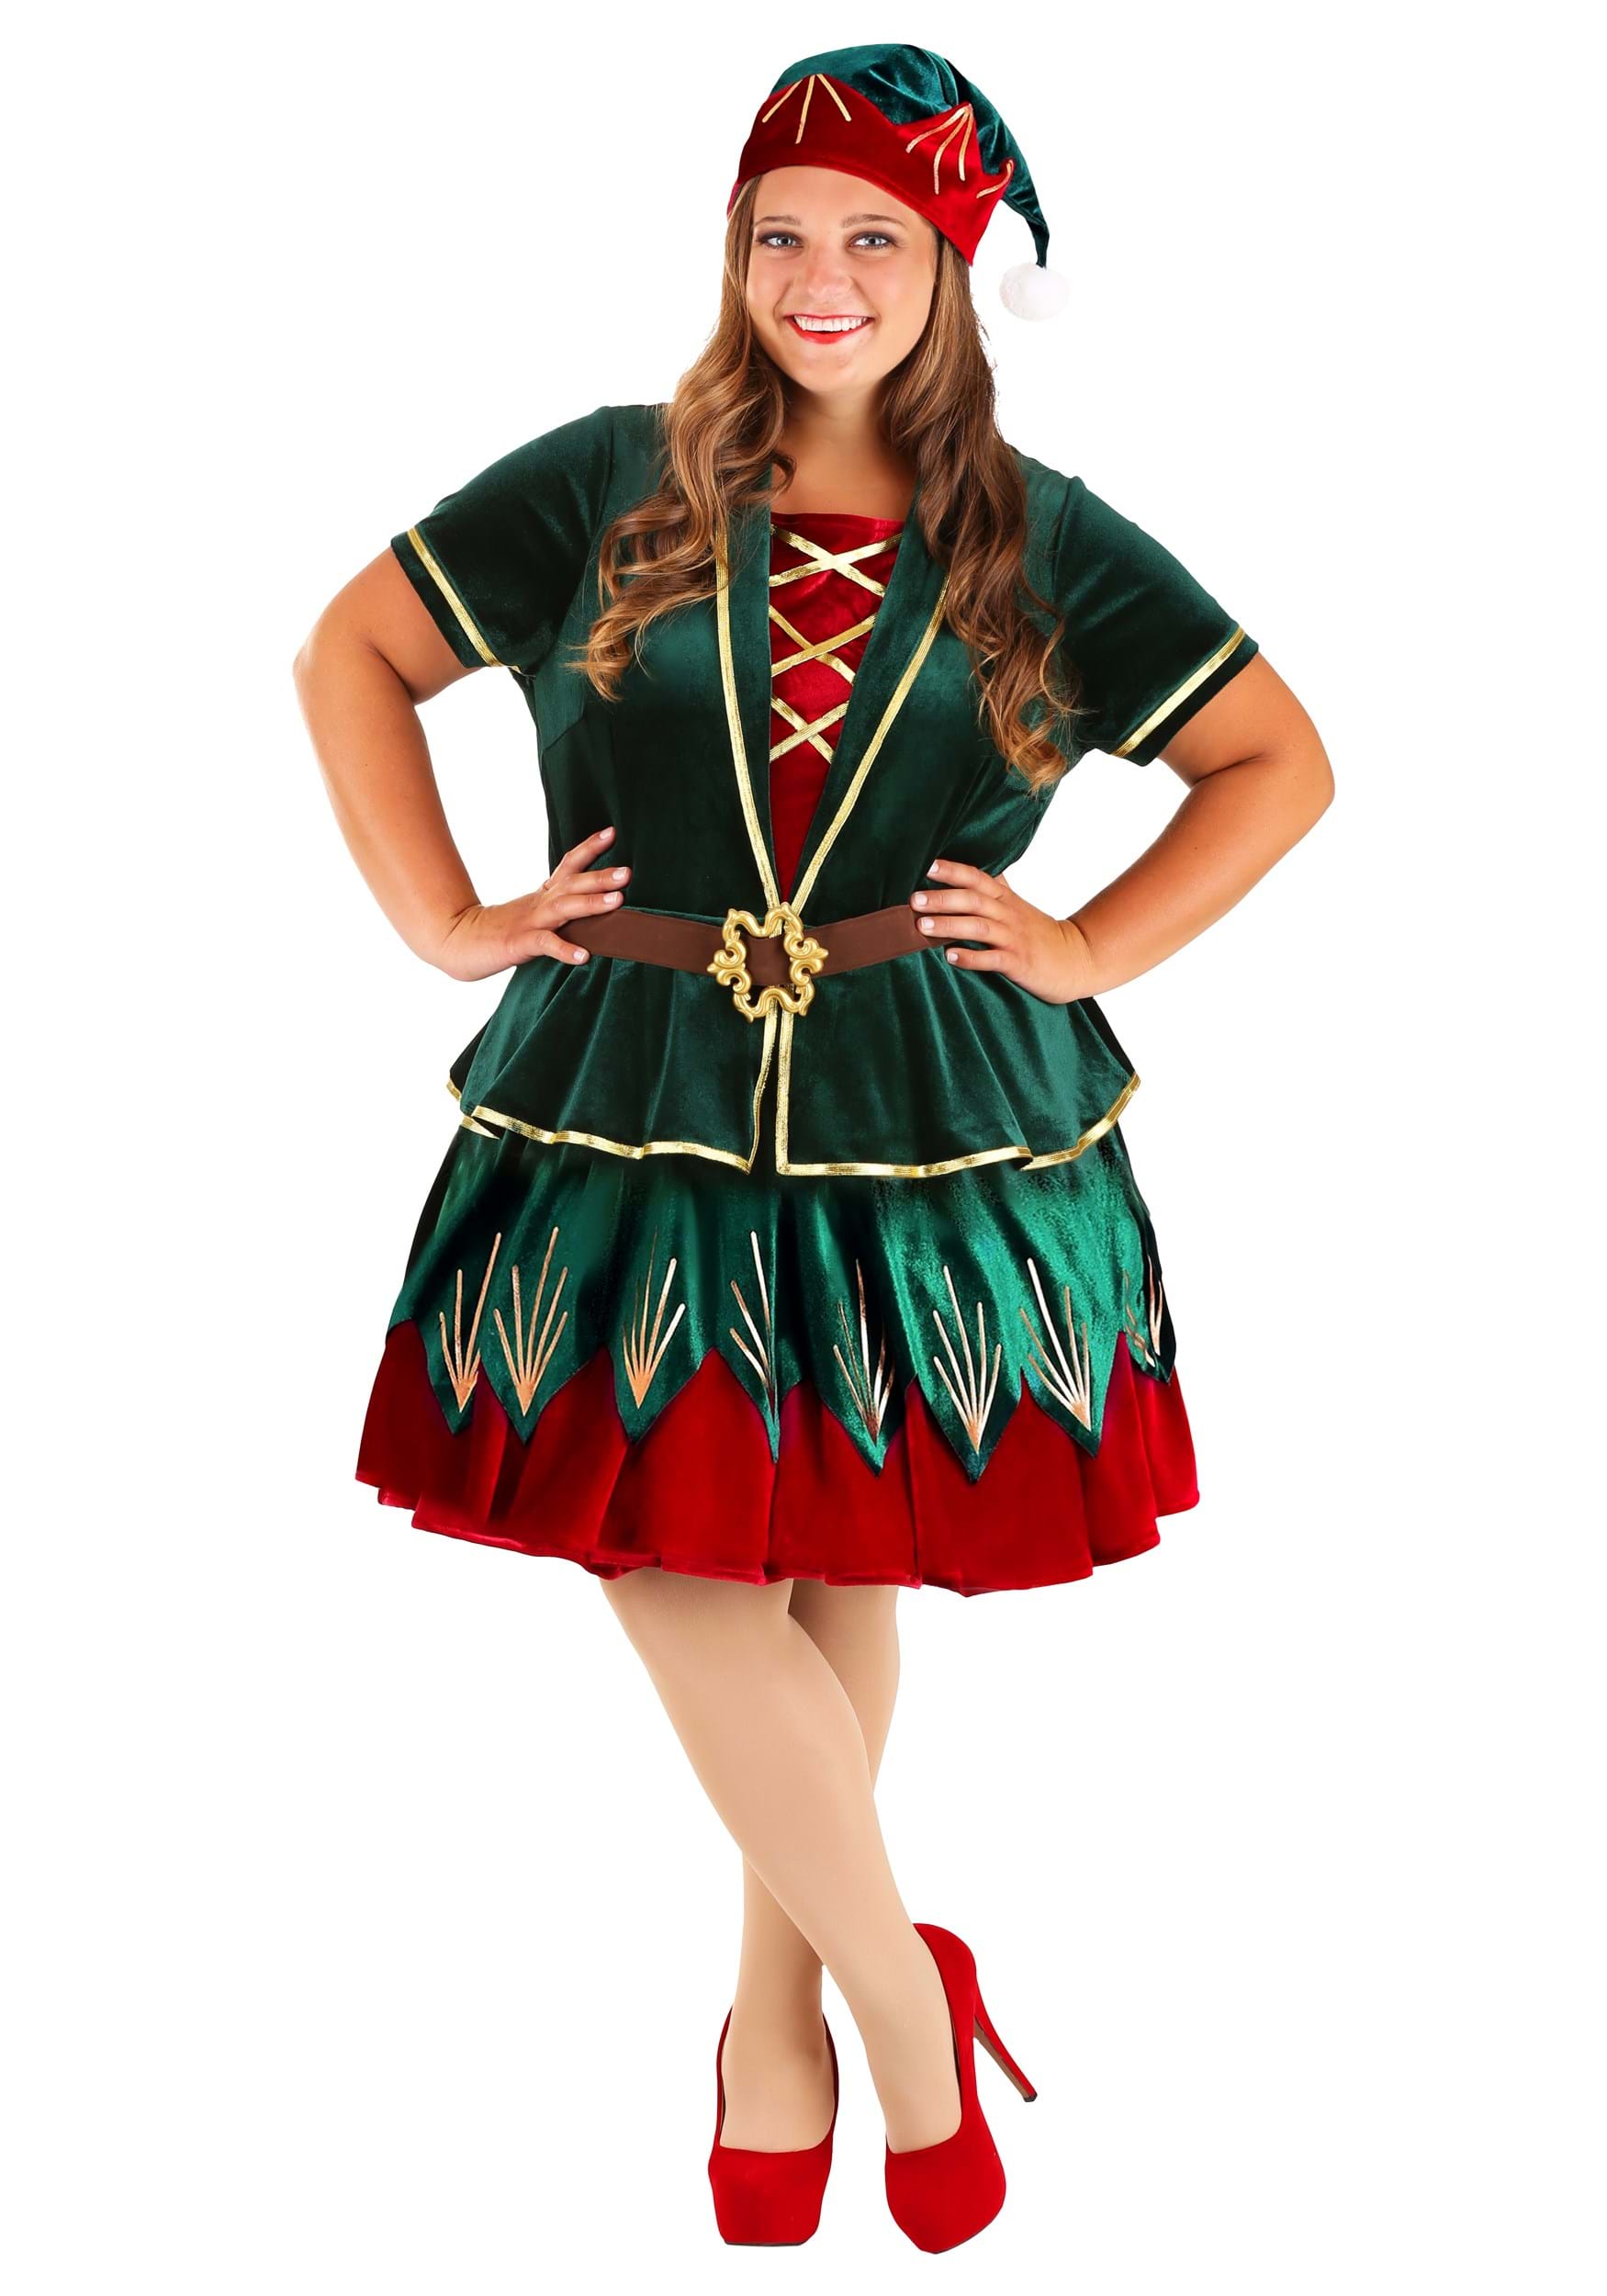 Plus Size Deluxe Holiday Elf Fancy Dress Costume For Women